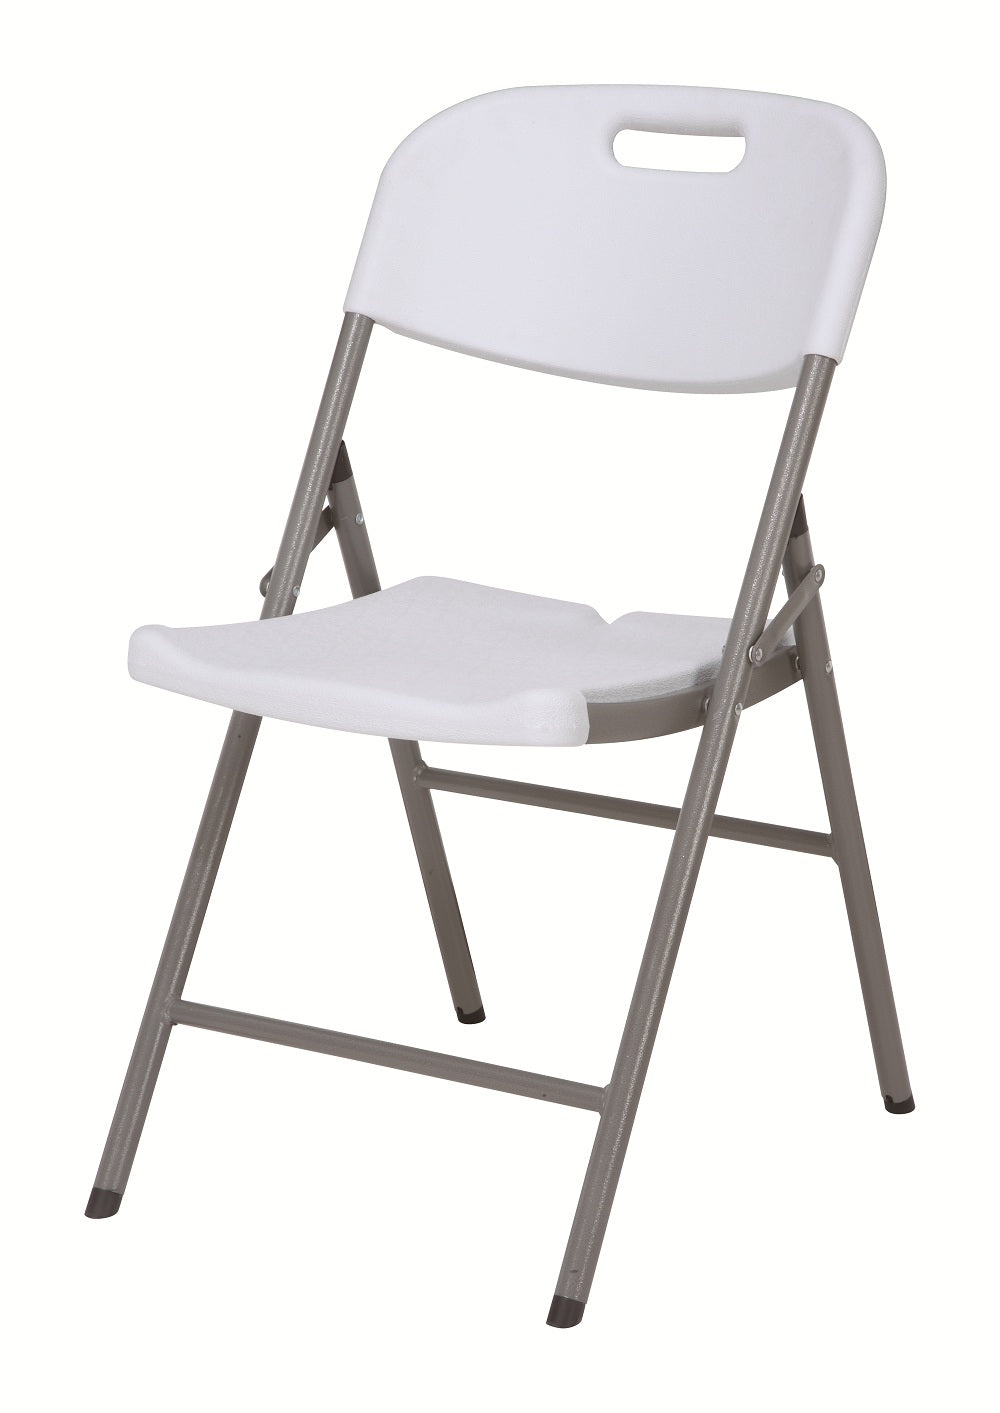 Outdoor Folding HDPE Chair  - White